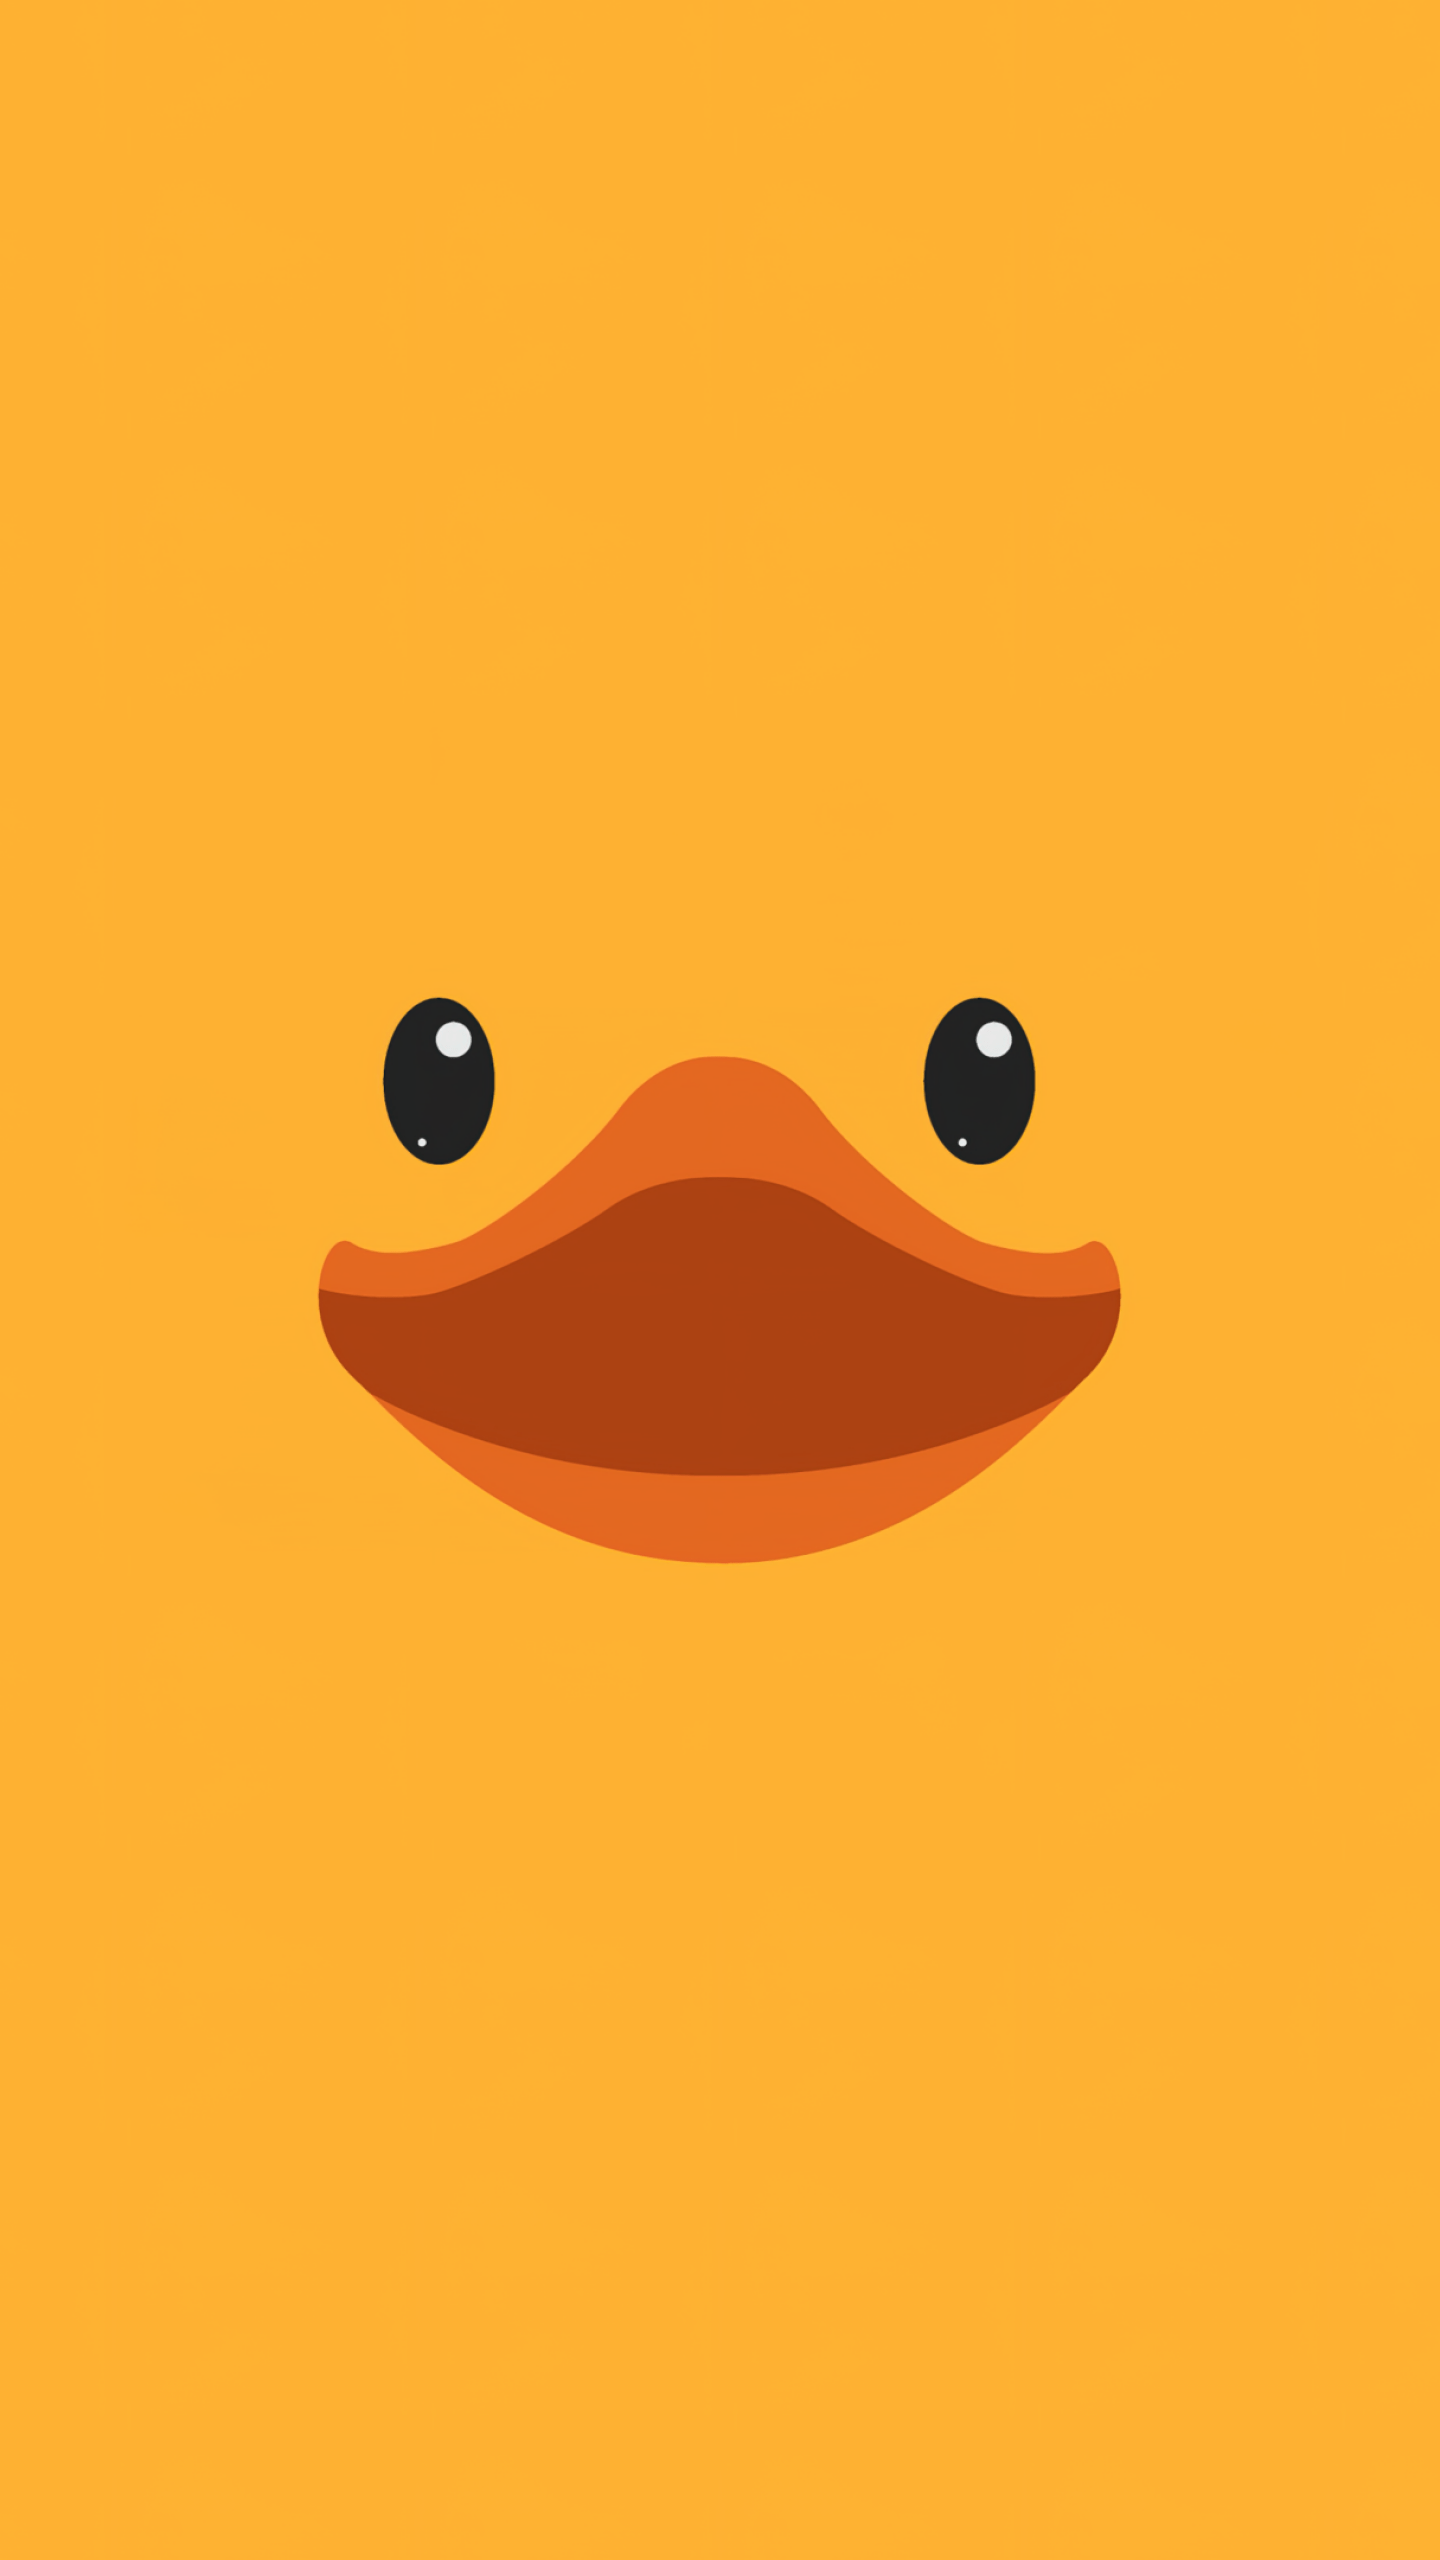 A picture of a duck face on a yellow background - Duck